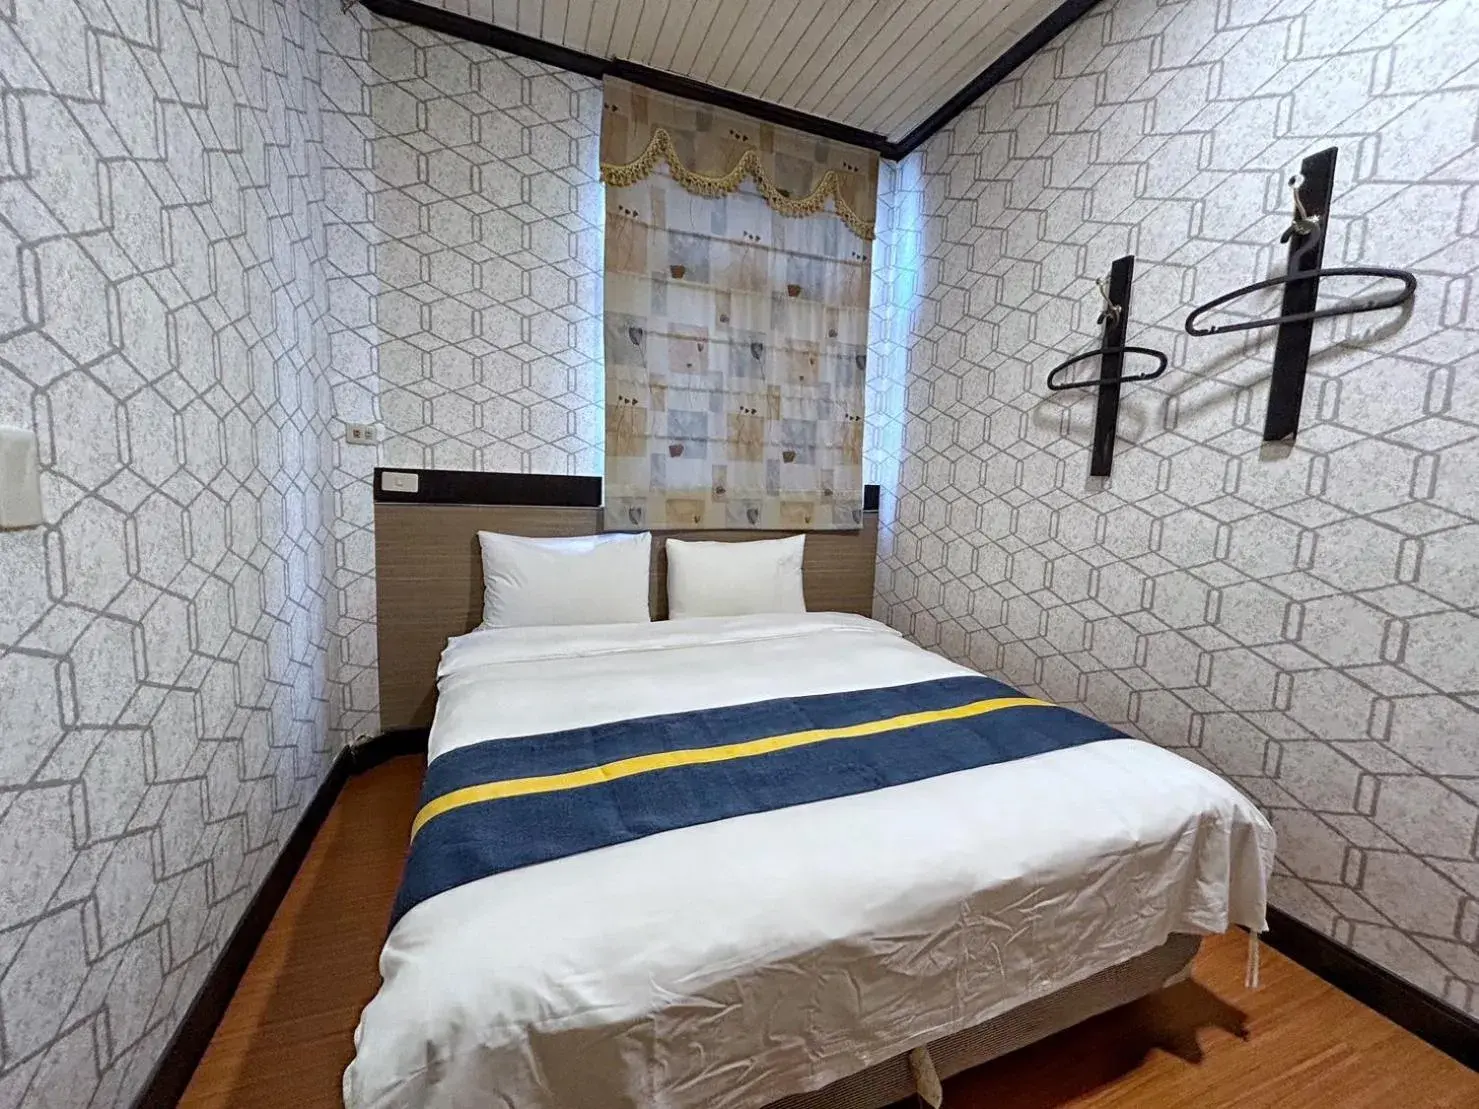 Property building, Bed in Fulong Hotel